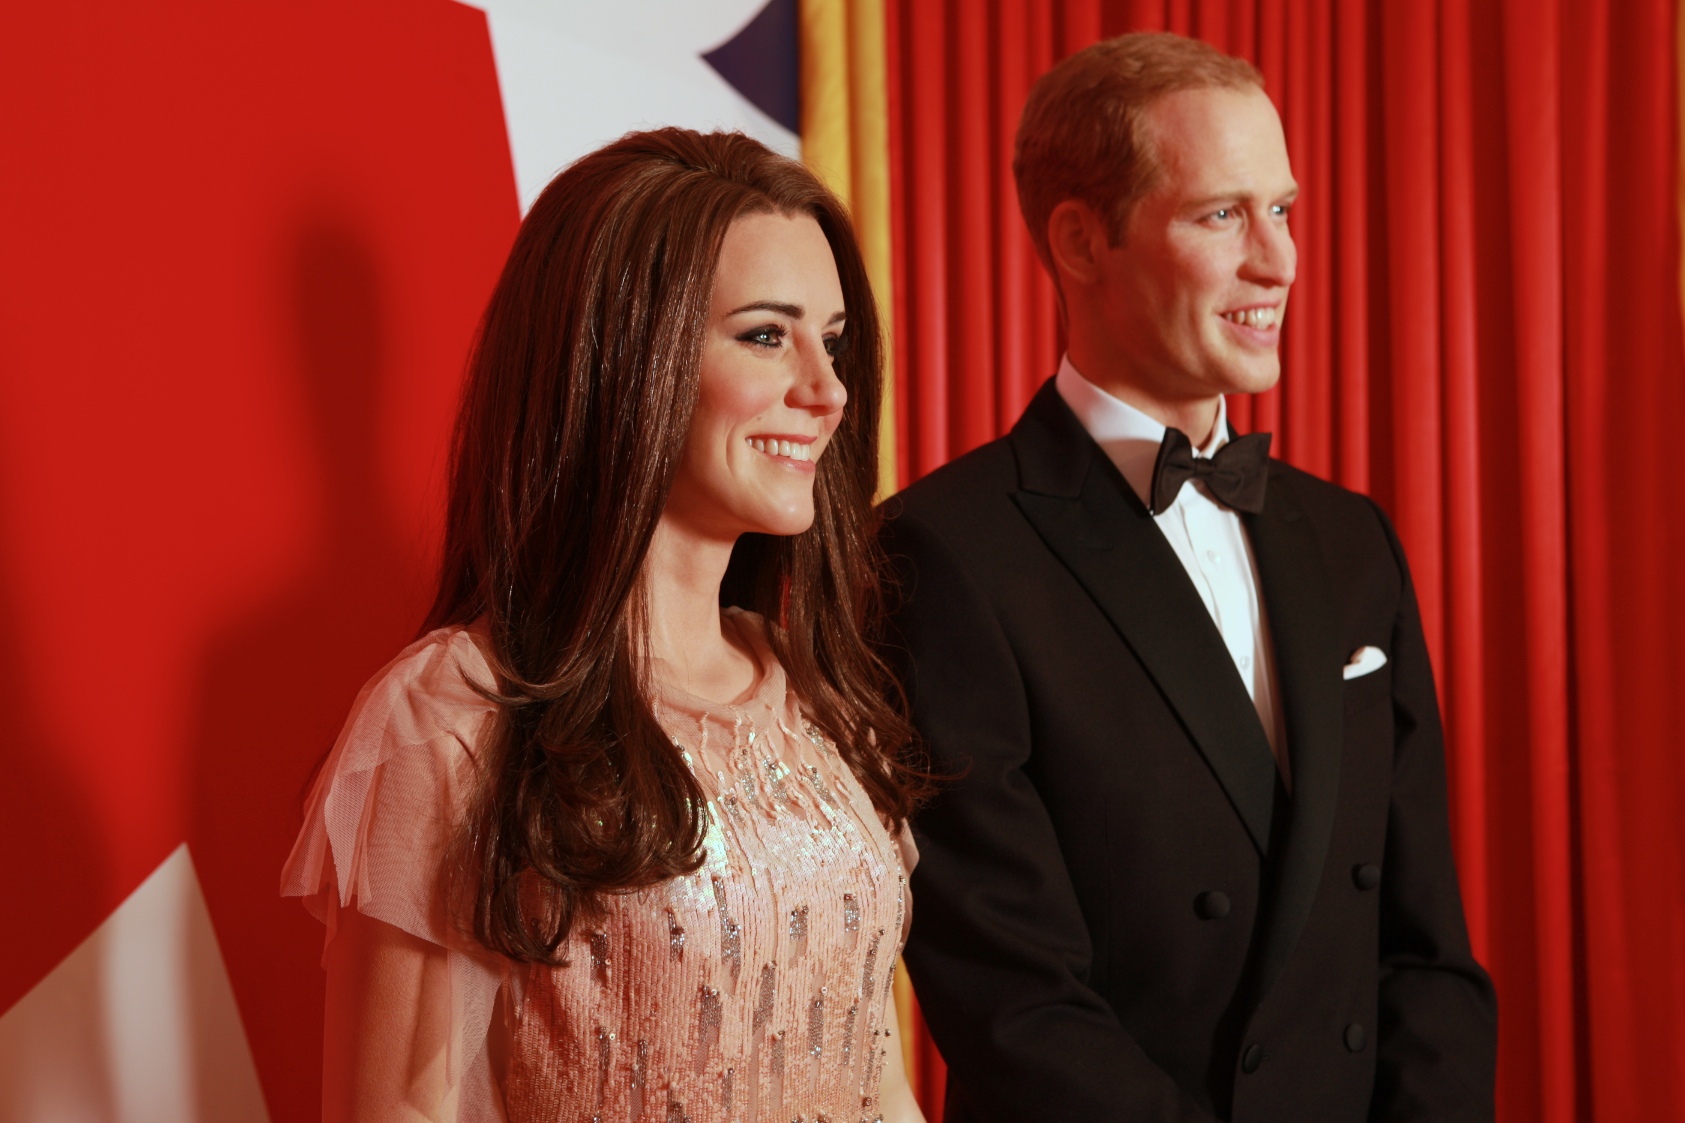 The Duke and Duchess of Cambridge wax figures at Madame Tussauds Blackpool